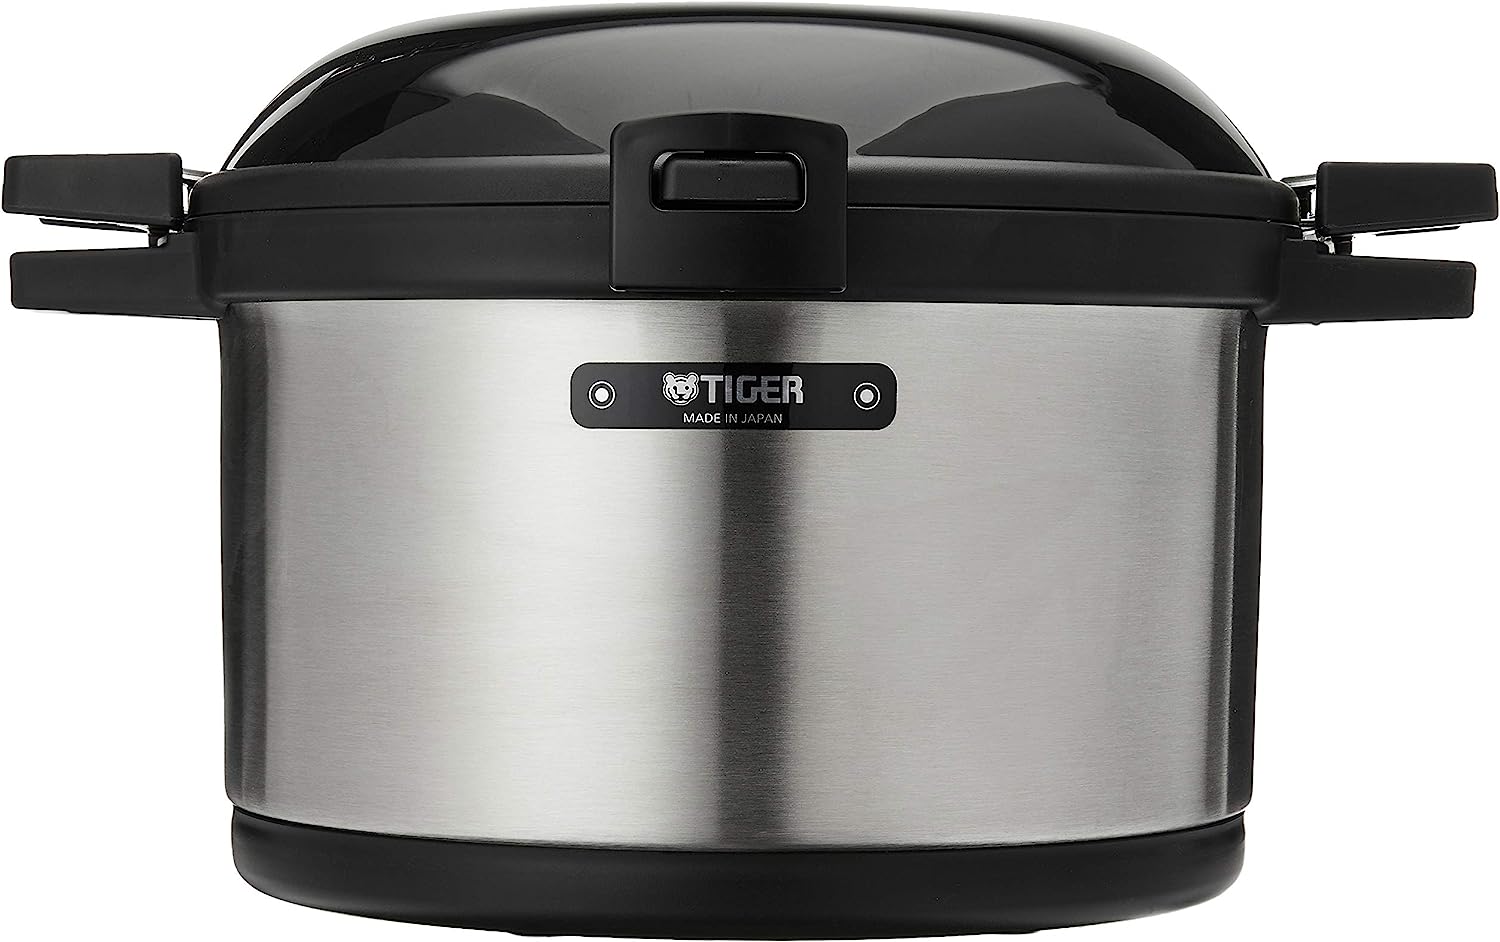 Tiger Non-Electric Thermal Cooker, 6 Liters